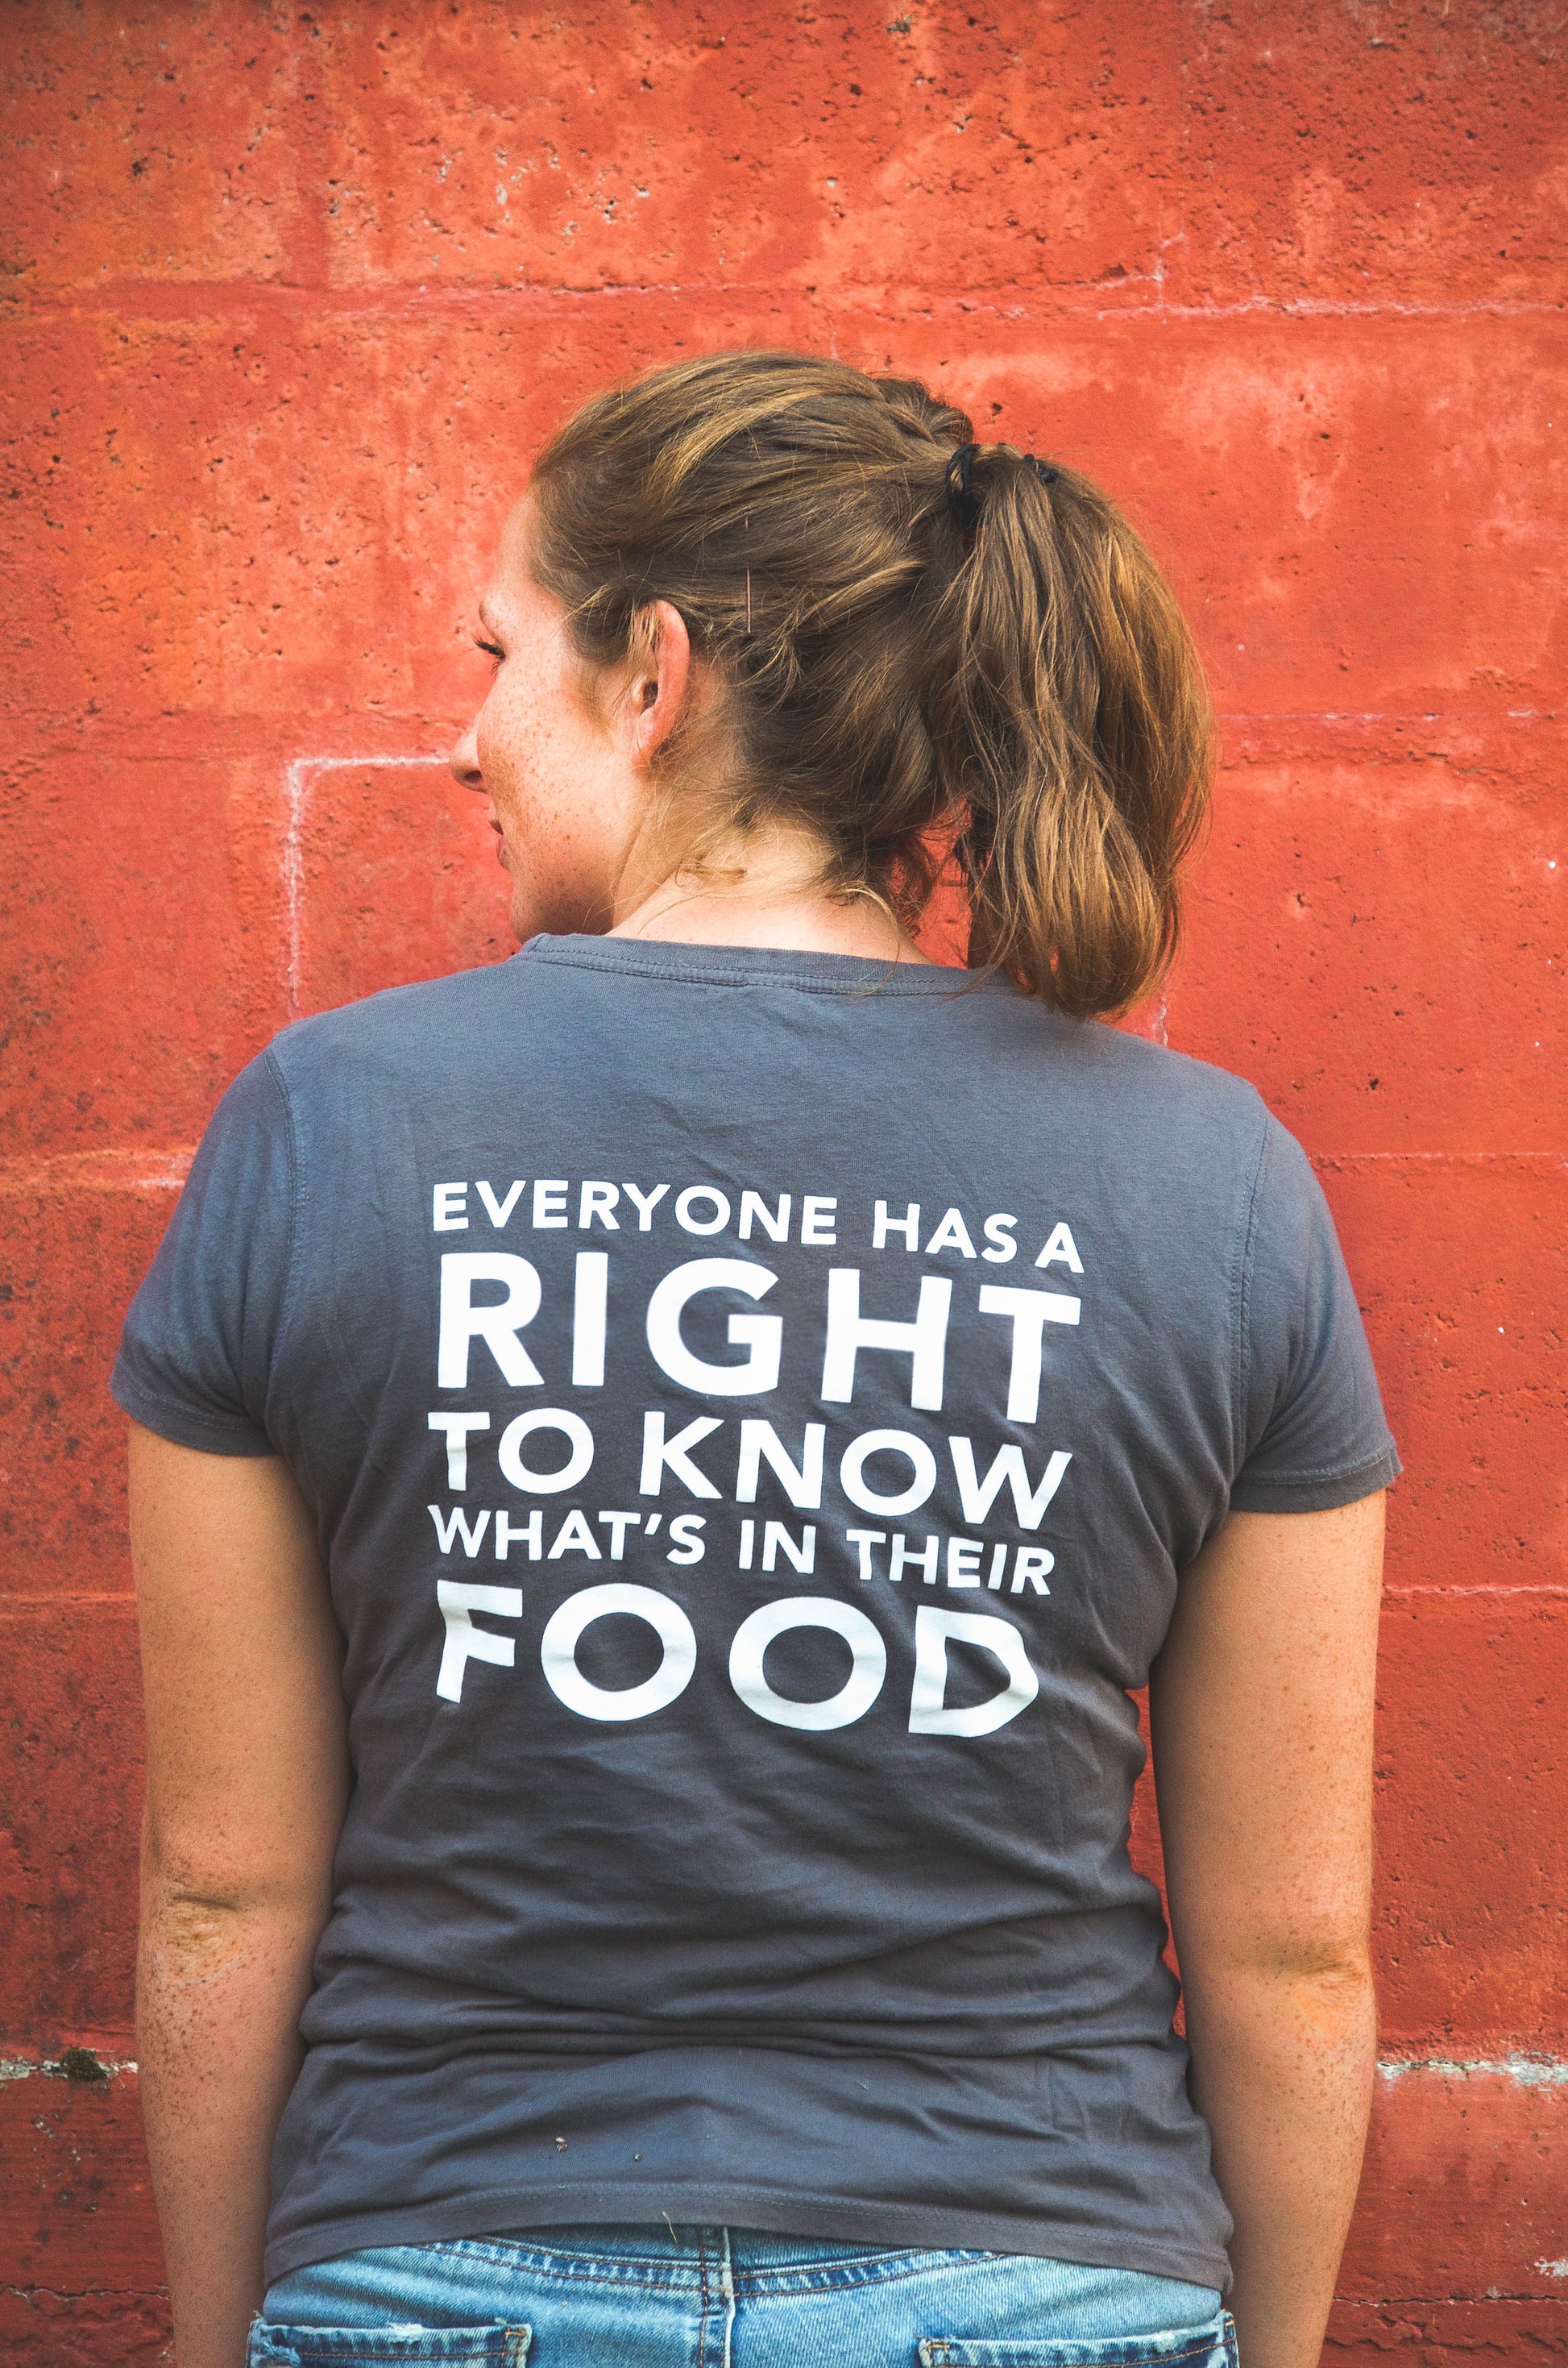 Woman standing in front of red barn wall, facing away from camera, wearing Non-GMO Project gray t-shirt with the back showing the quote "Everyone has a right to know what's in their food"